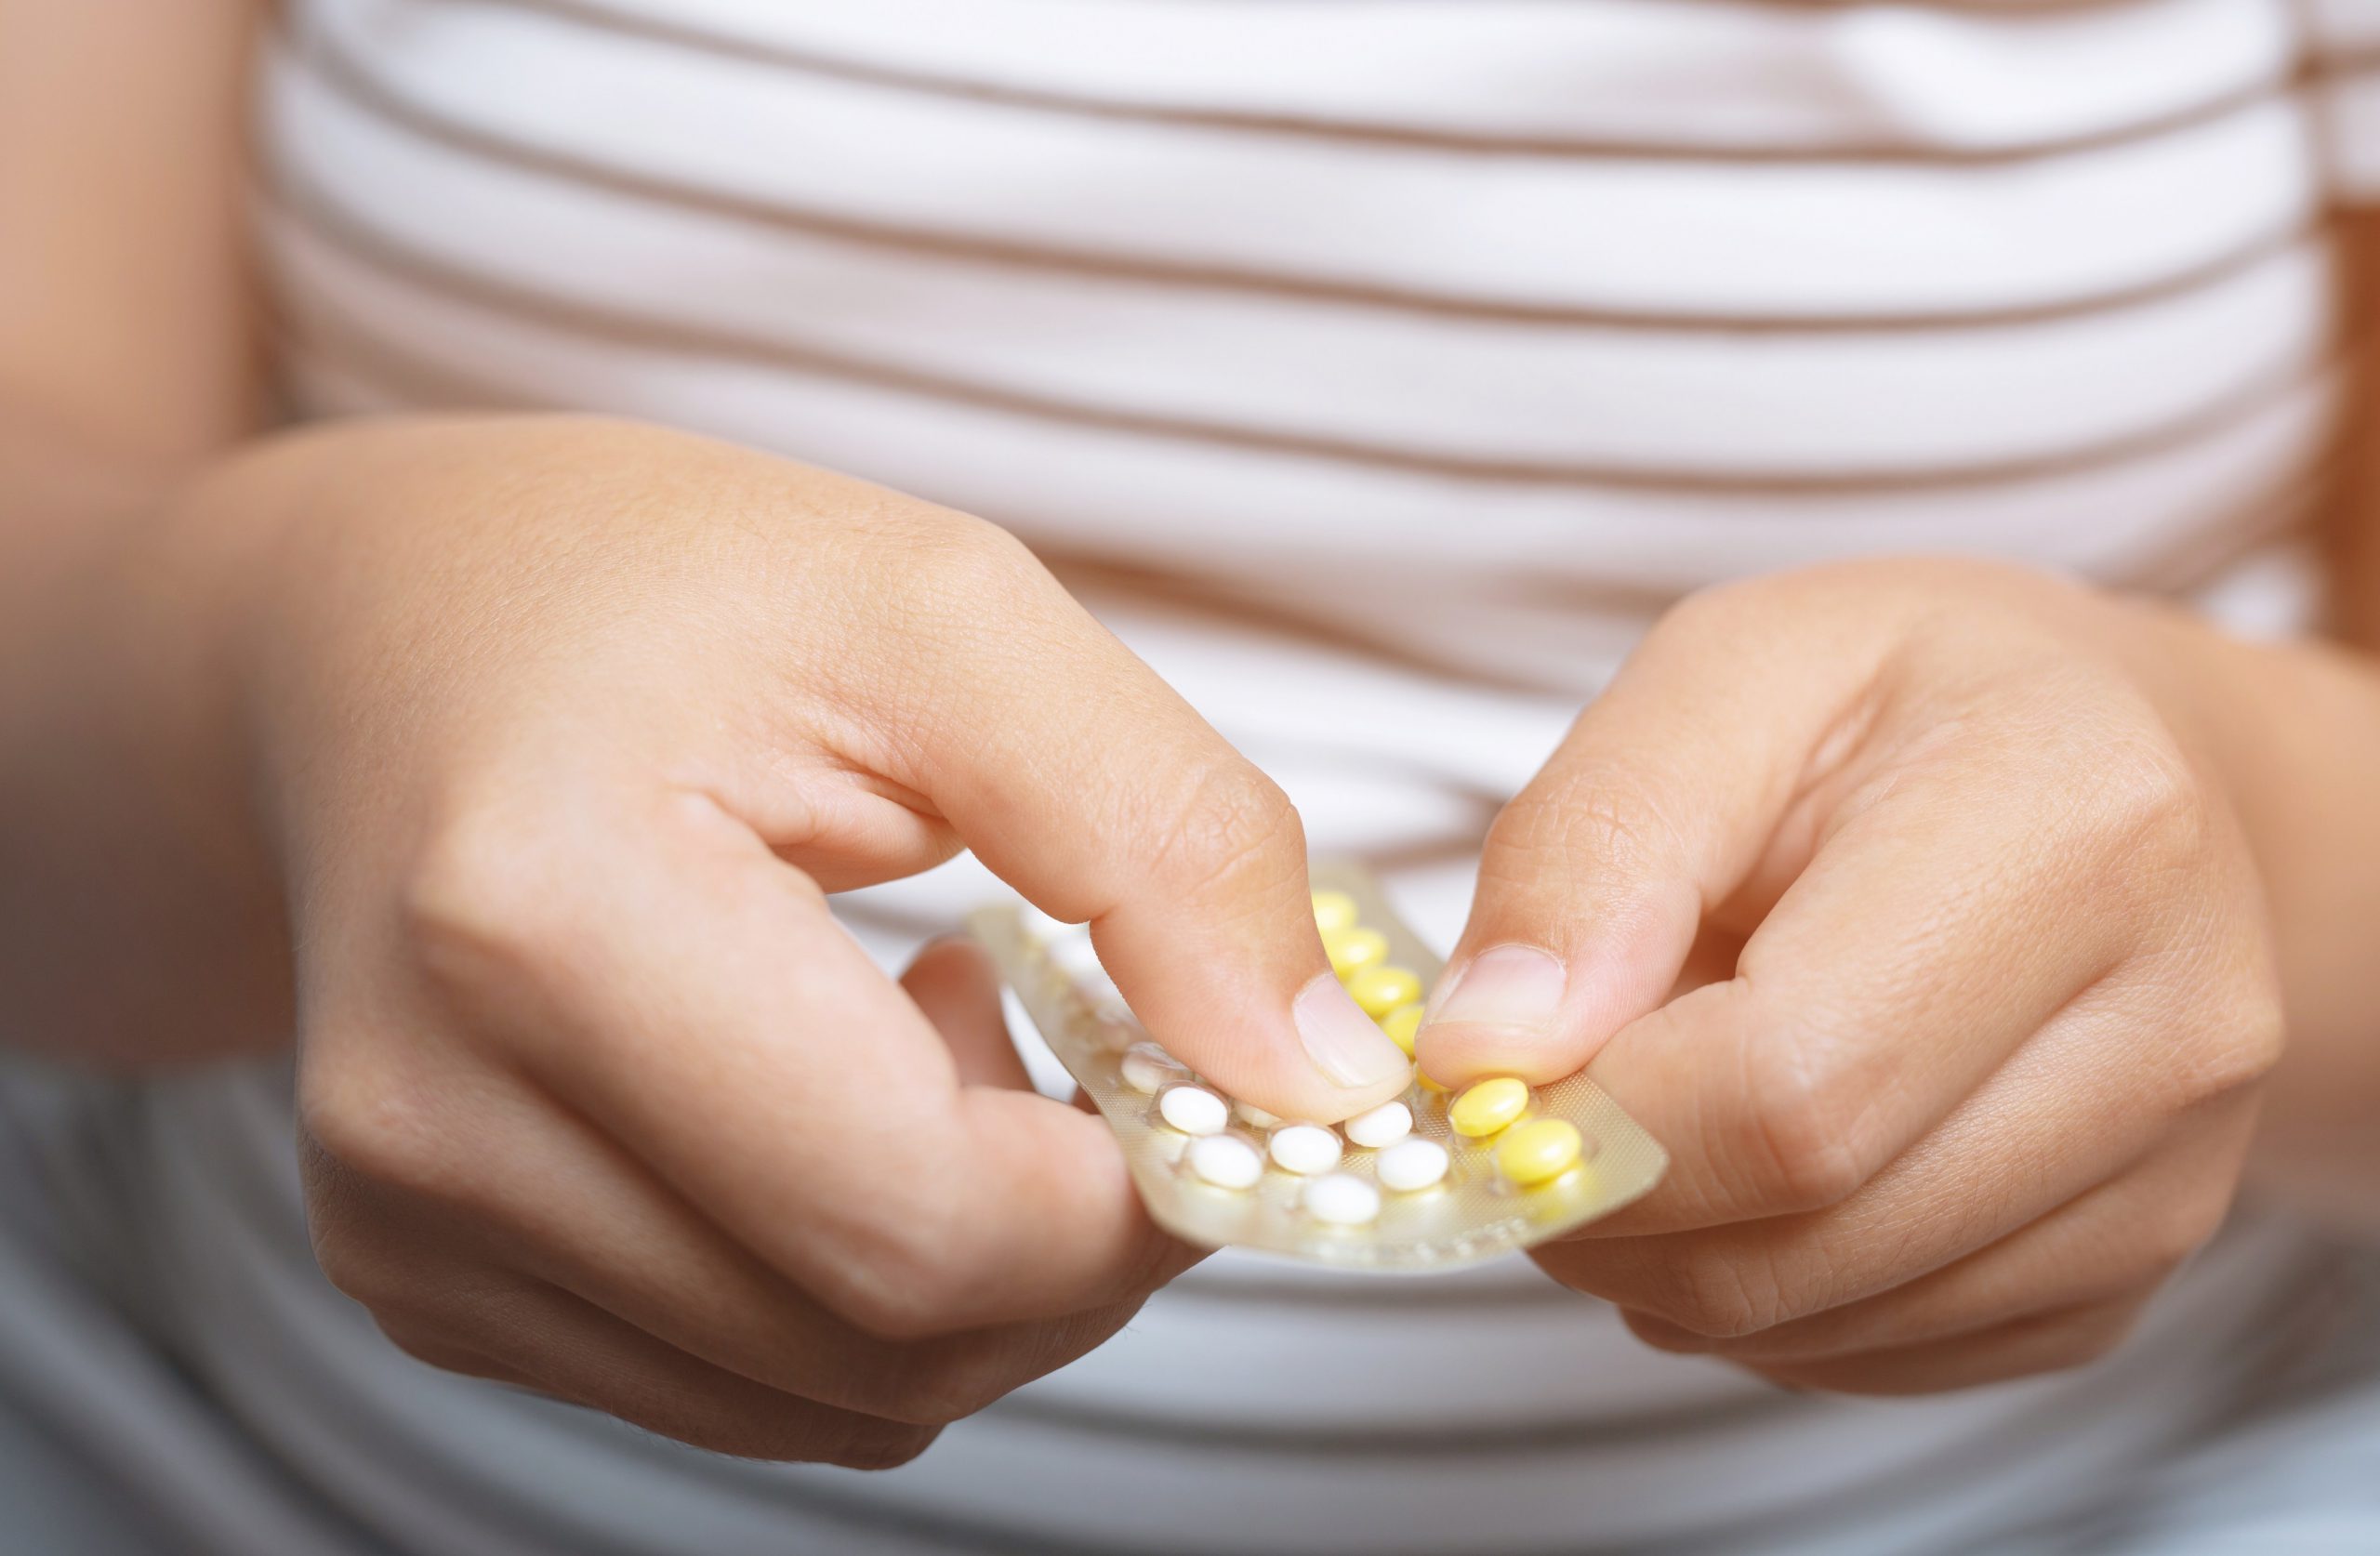 Contraception: Myths and Facts